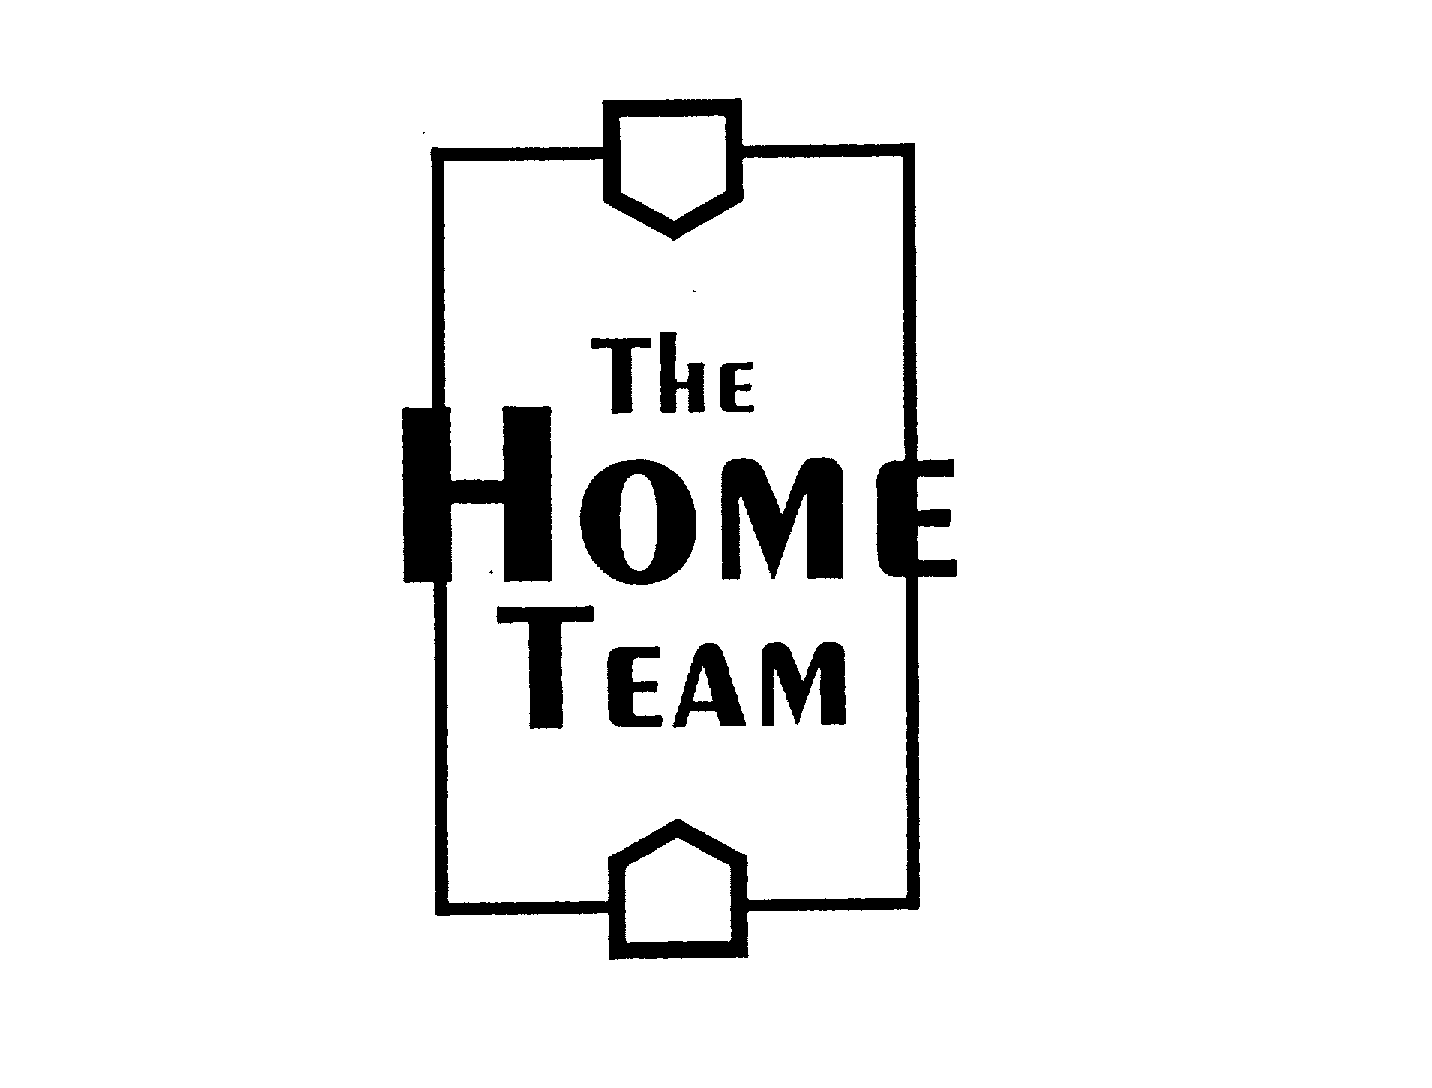 THE HOME TEAM